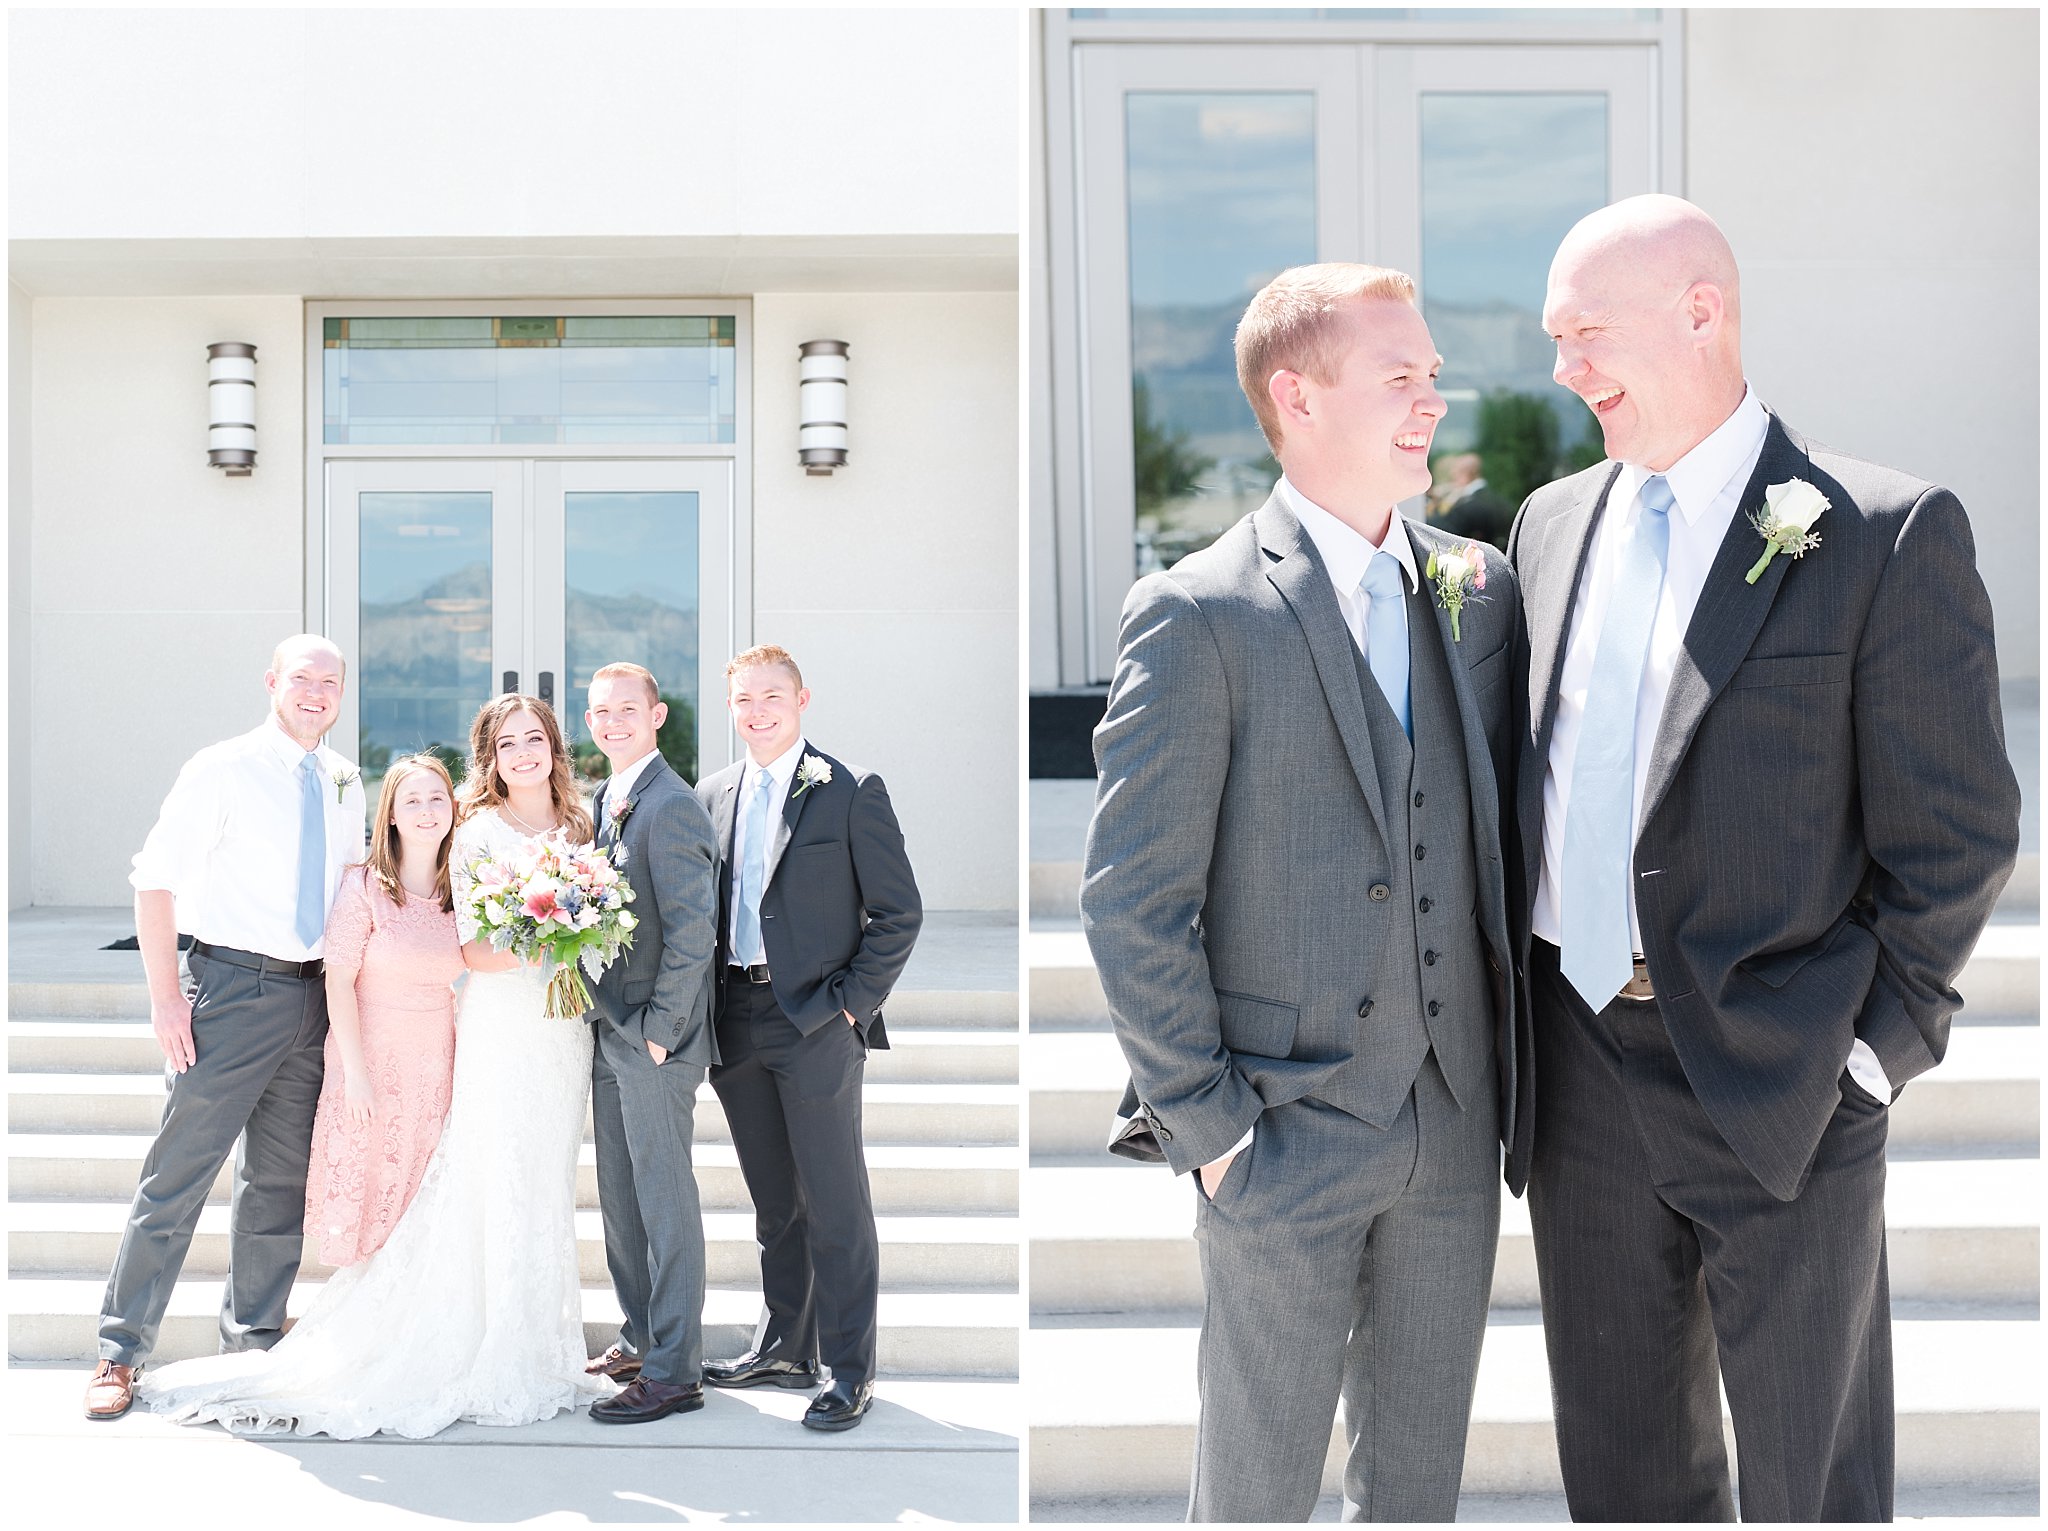 Bride with lace wedding dress and veil and groom wearing grey suit with light blue tie | Family portraits | Ogden Temple Summer Wedding | Jessie and Dallin Photography